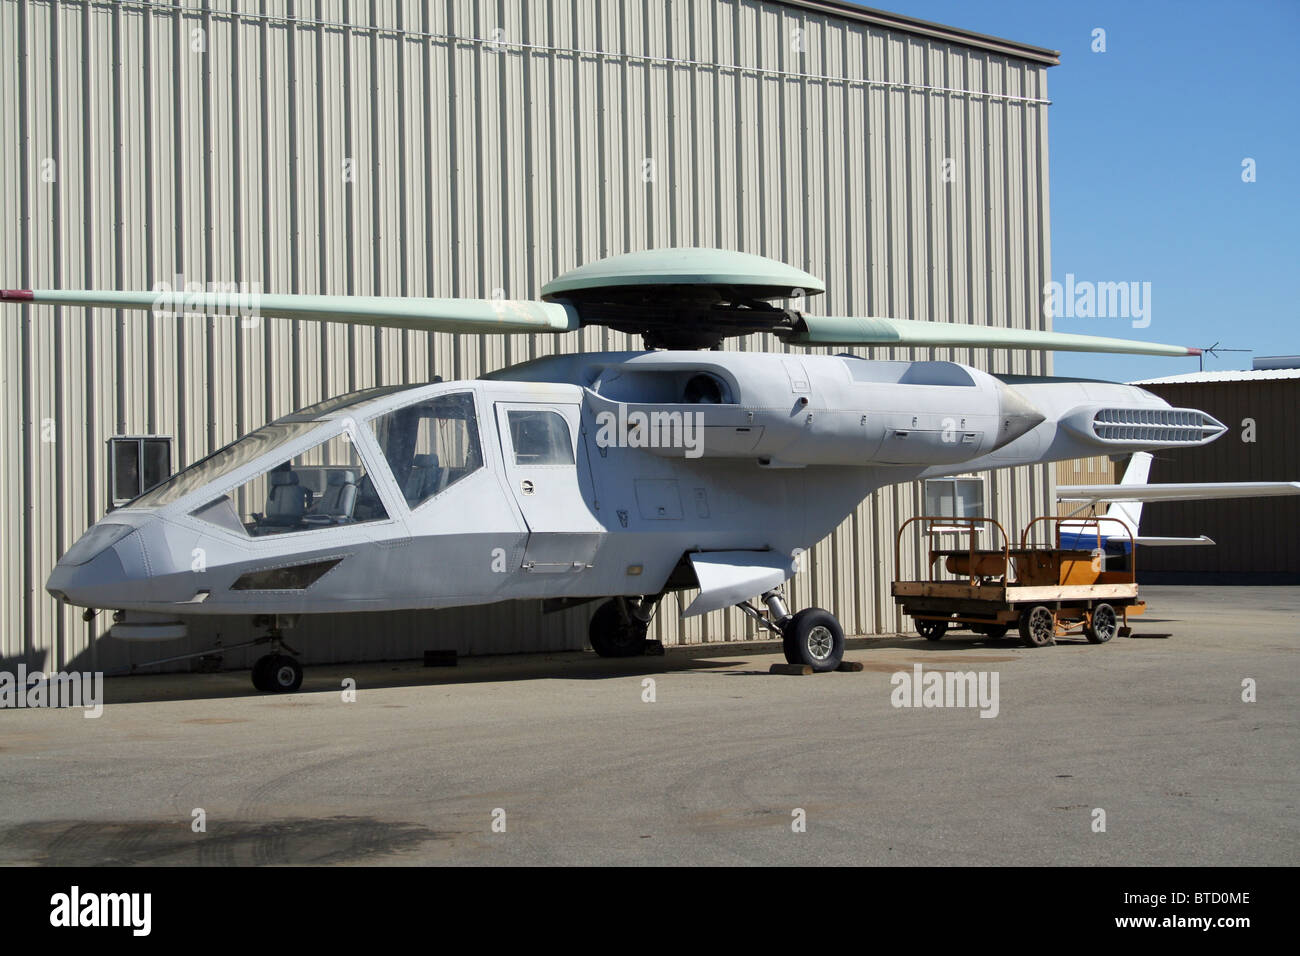 Mock helicopter used in the bad Arnold Schwarzenegger movie 'The 6th Day'. Mojave airport, California, USA Stock Photo